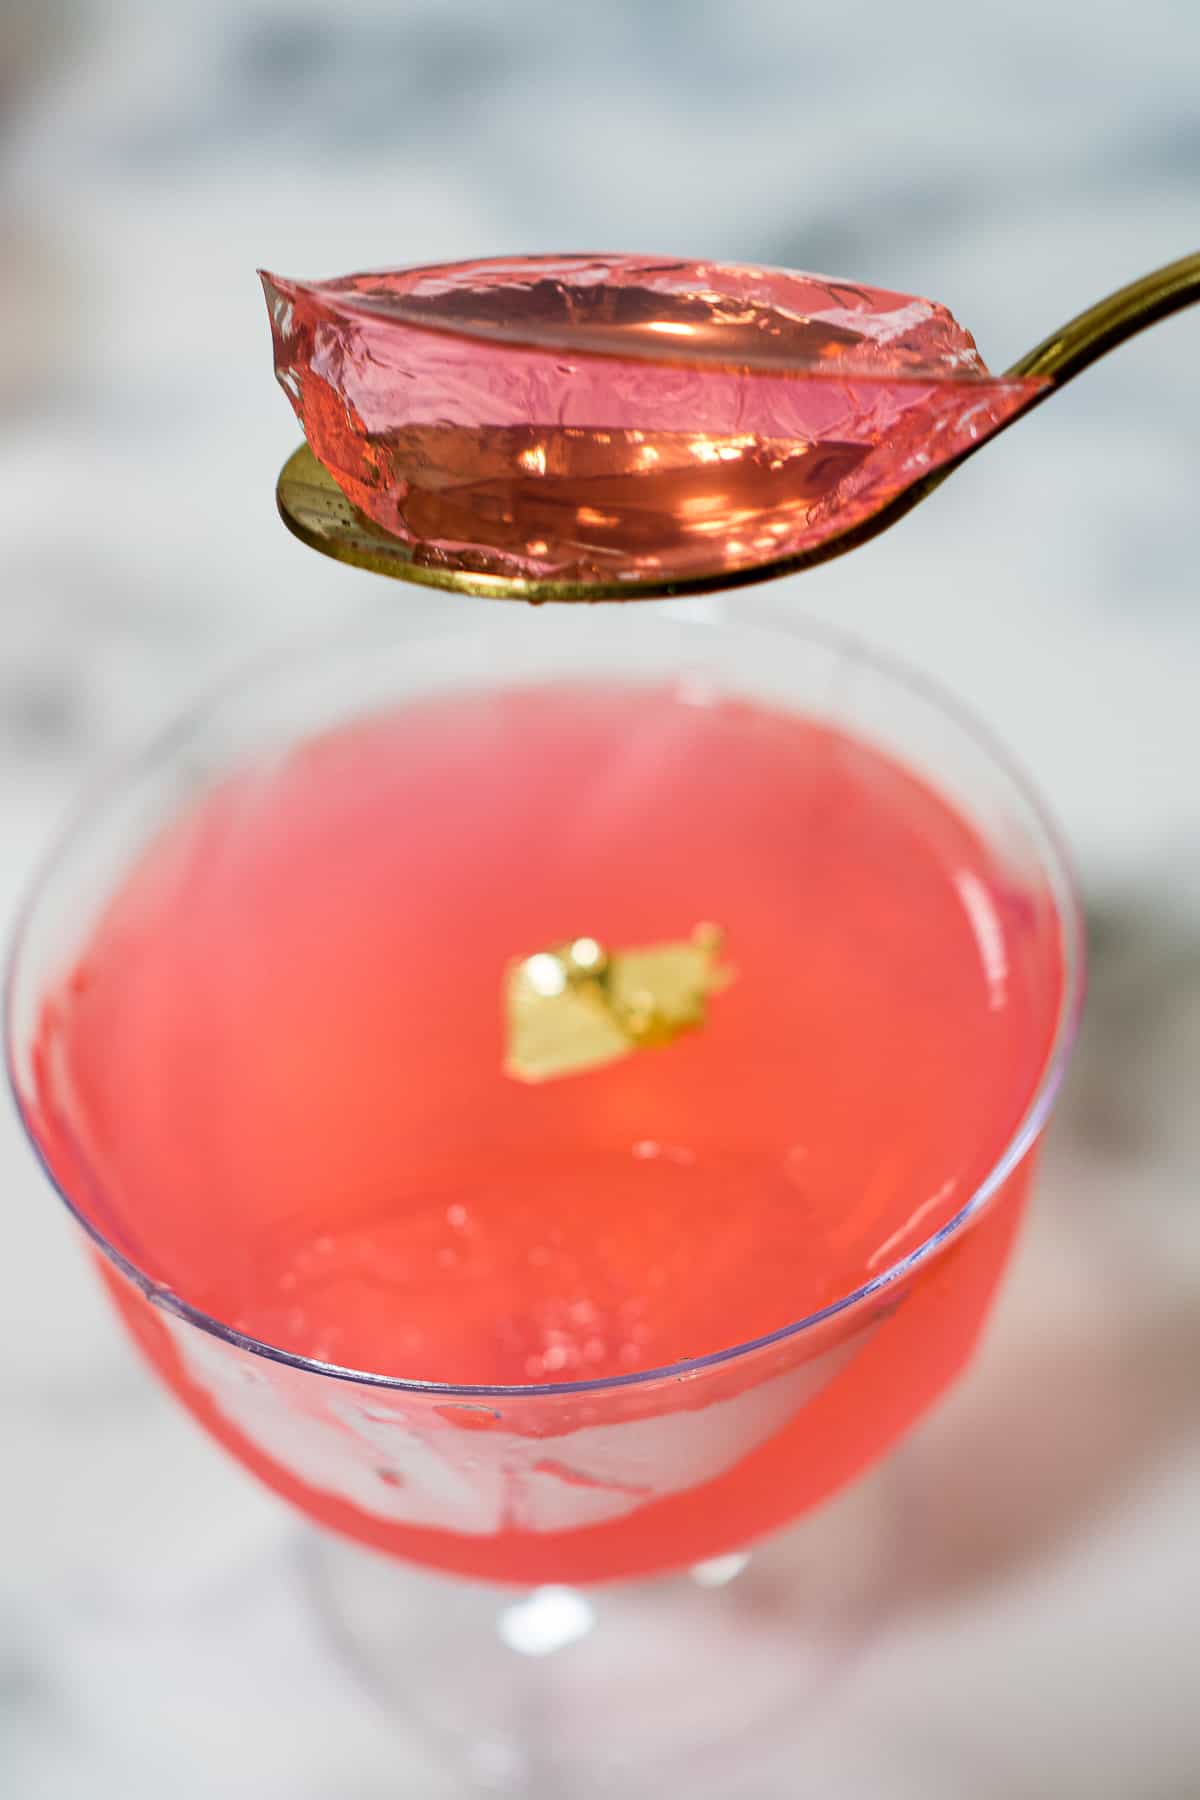 A scoop of pink jelly in a gold spoon.